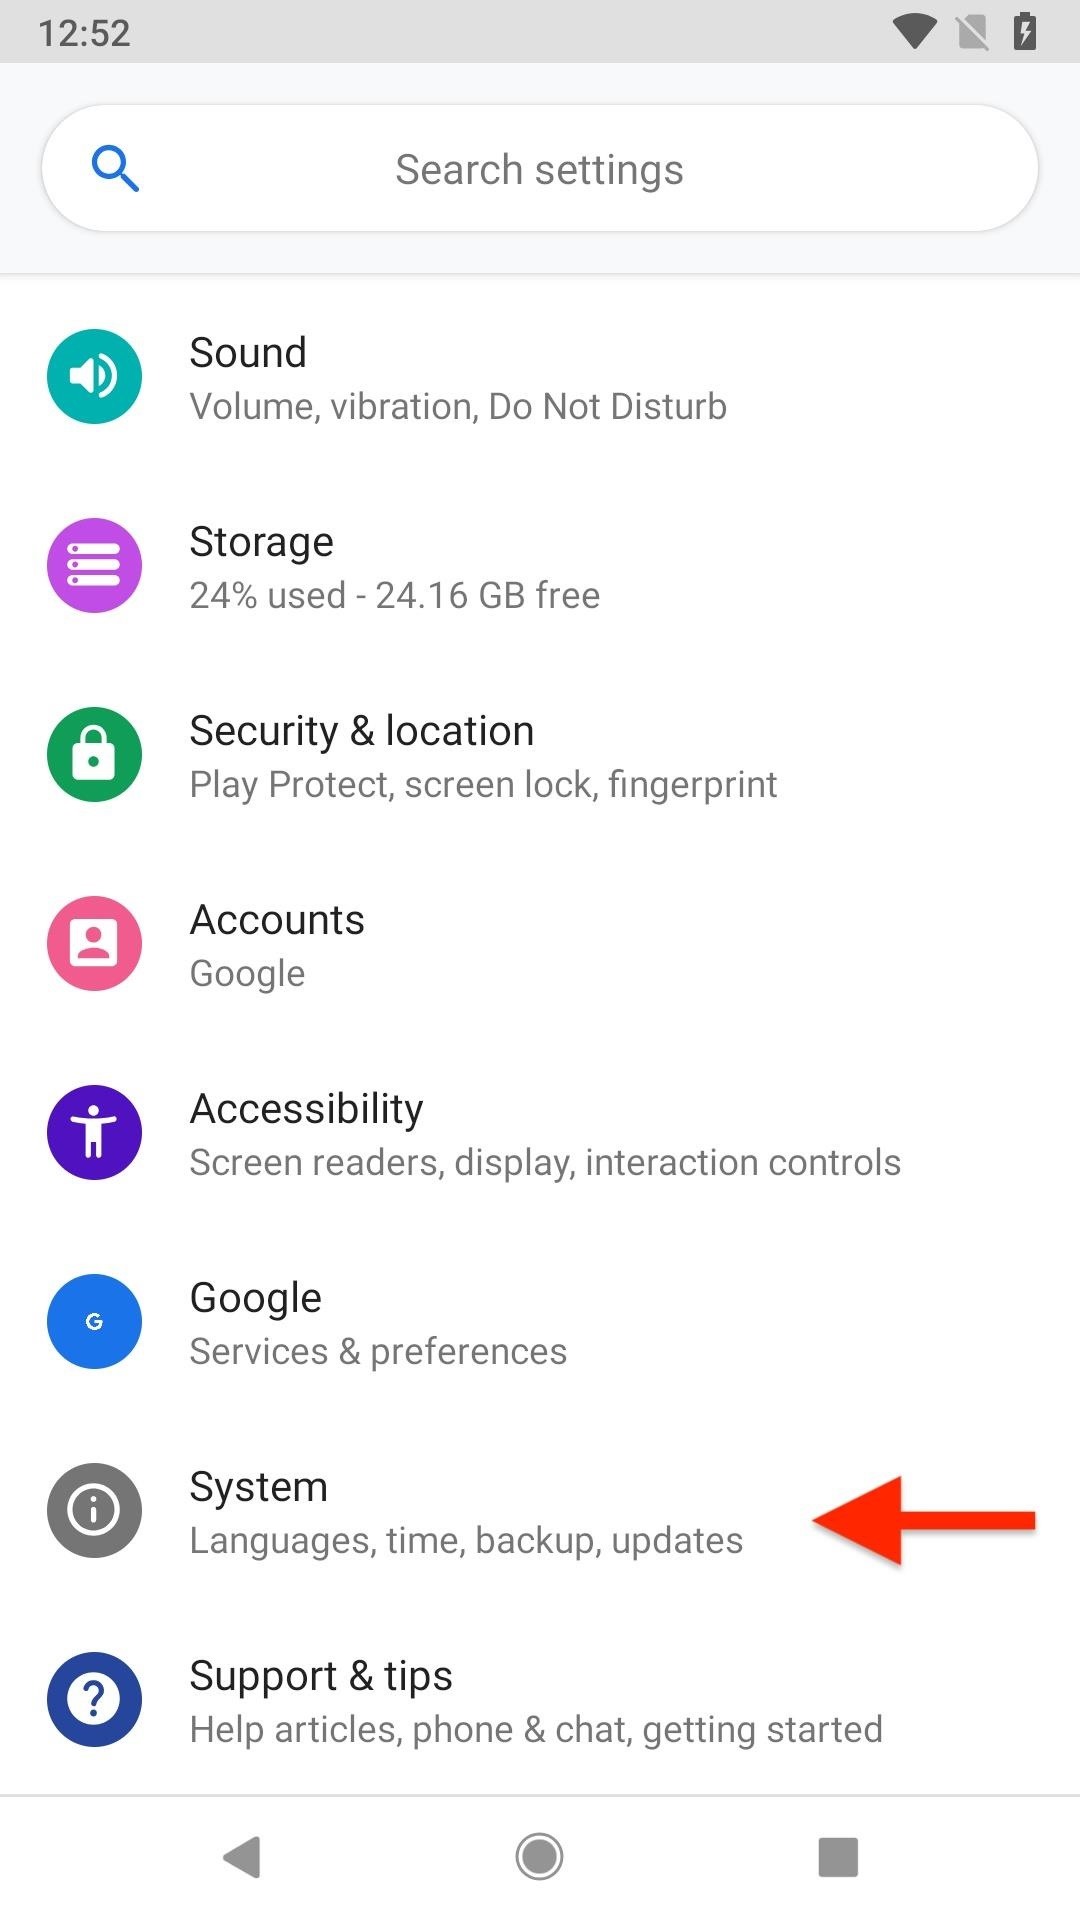 How to Unlock Developer Options on Your Pixel in Android 9.0 Pie